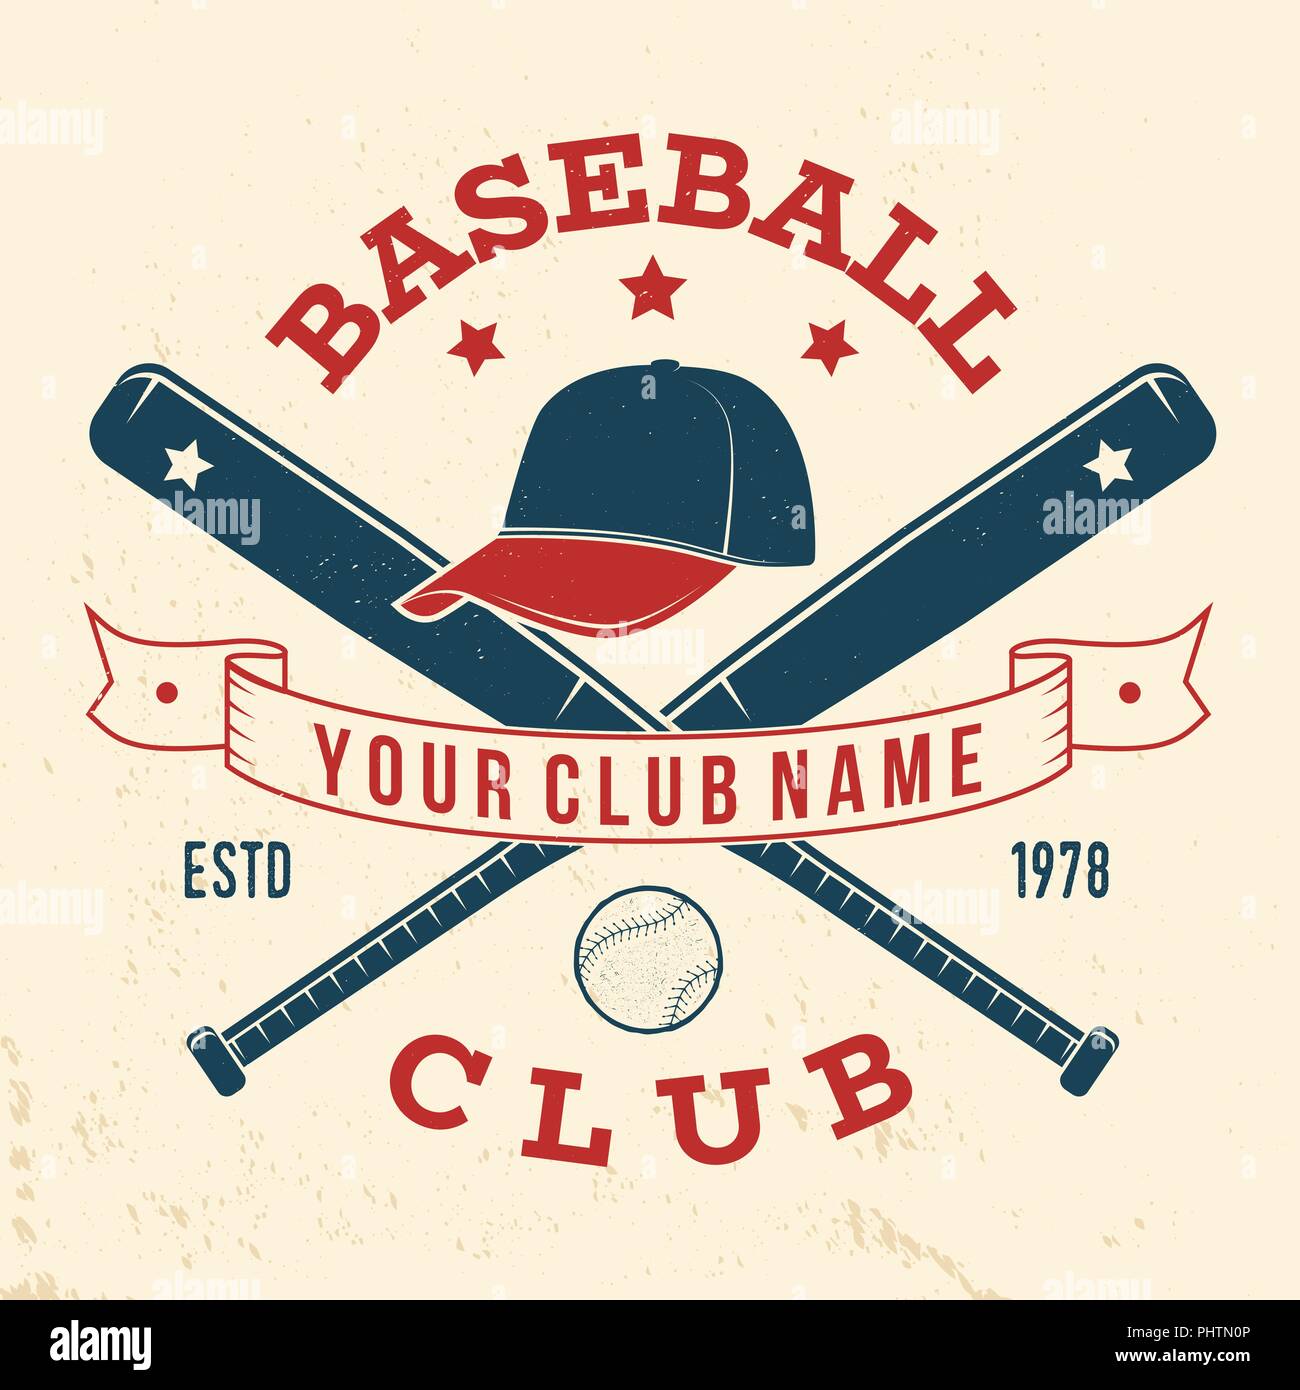 Baseball club badge. Vector illustration. Concept for shirt or logo, print, stamp or tee. Vintage typography design with baseball bats, cap and ball for baseball silhouette. Stock Vector